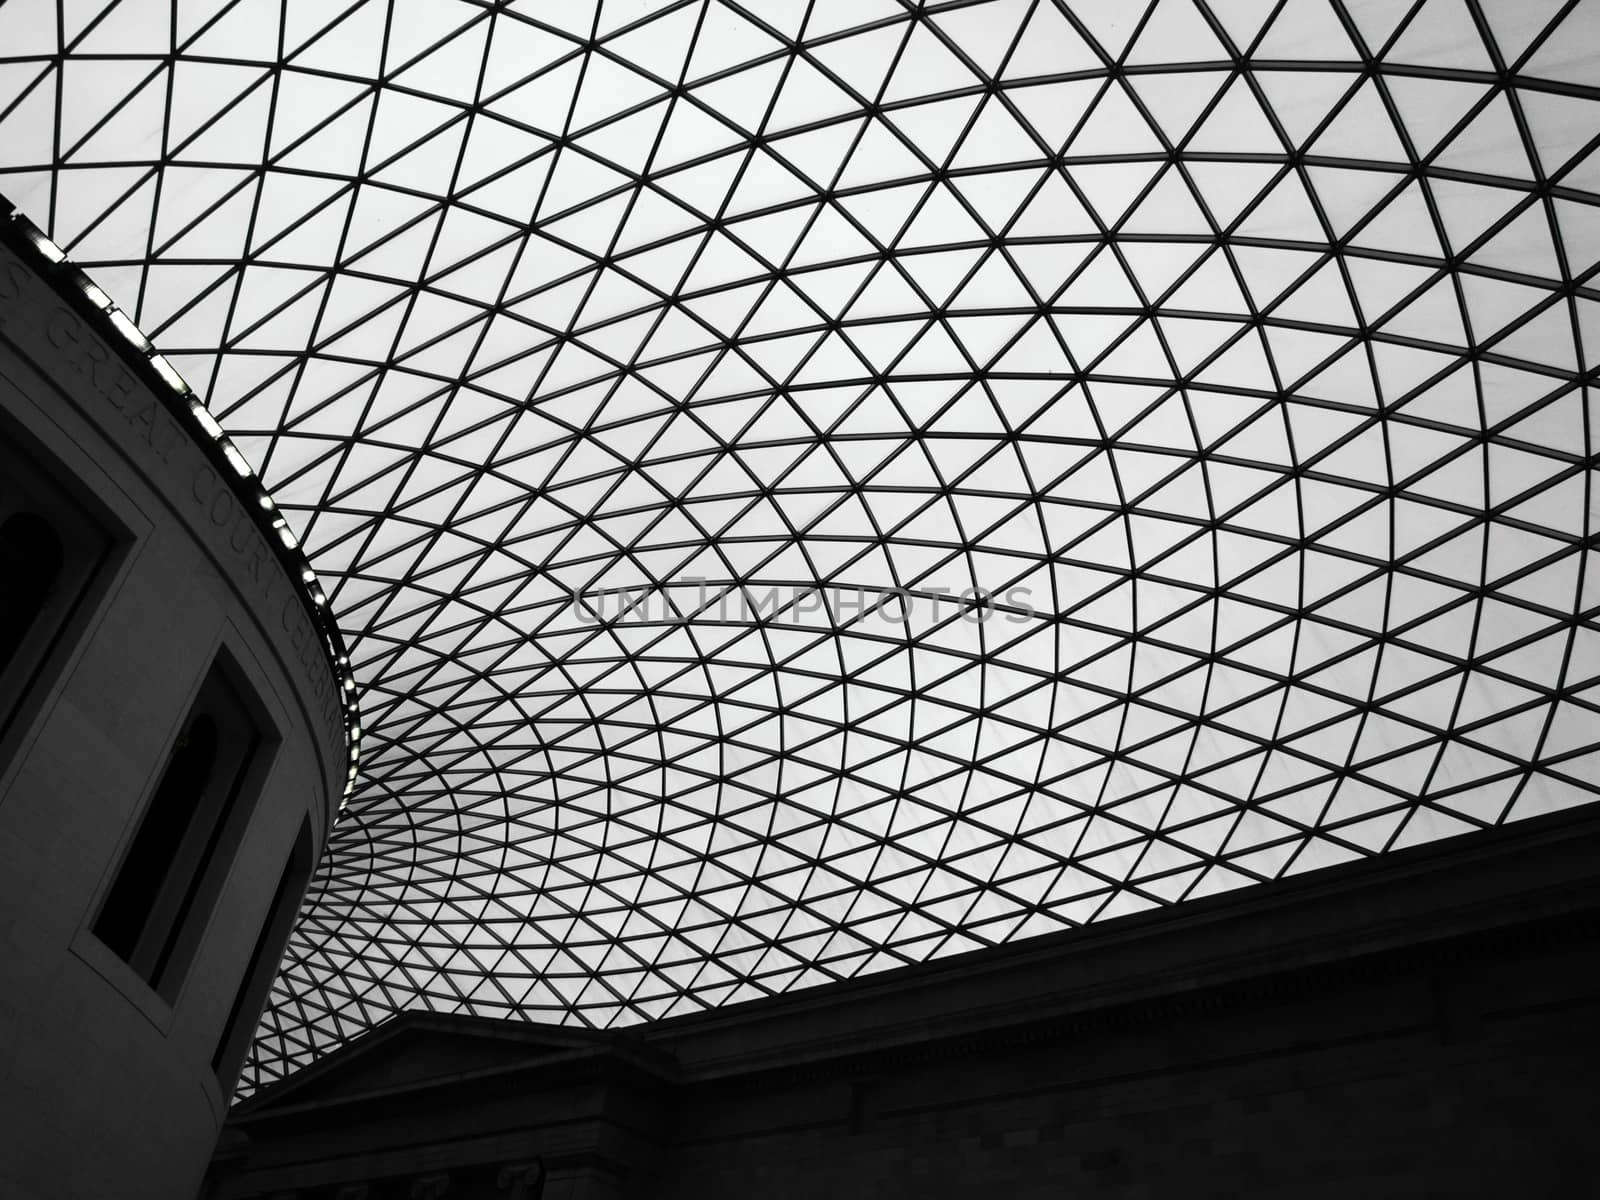 British Museum by anderm